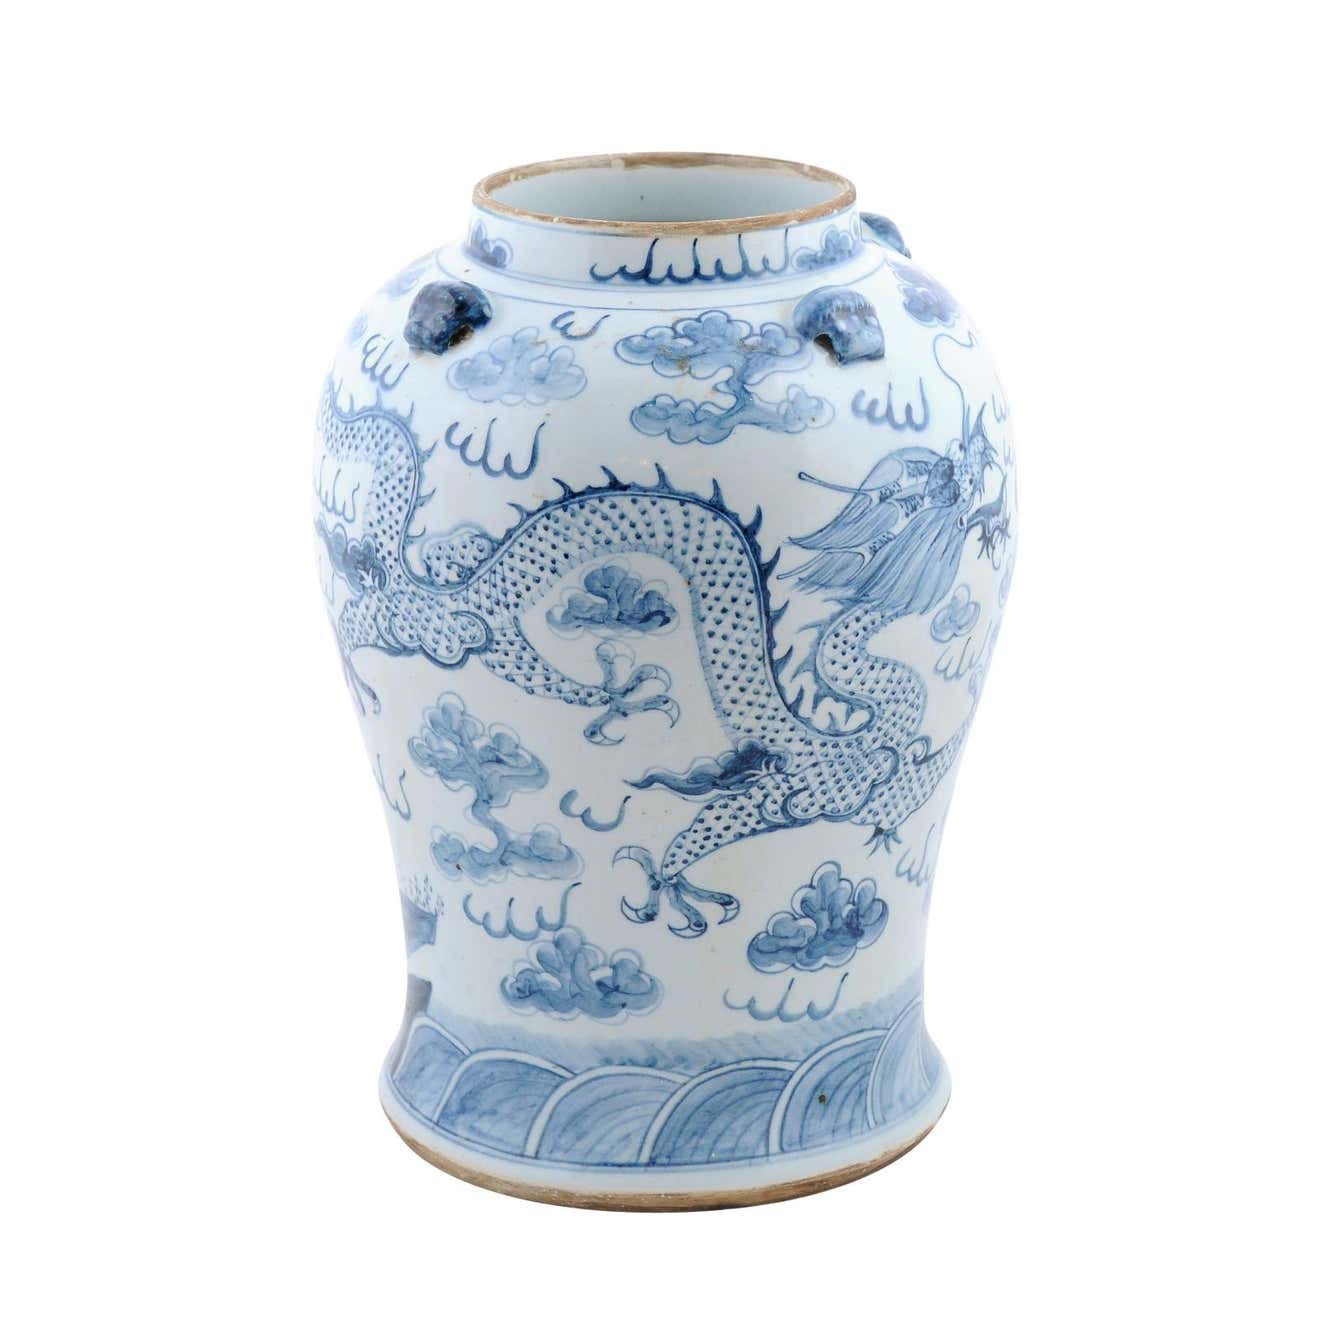 Chinese Export 20th Century Blue and White Porcelain Vase with Dragon Motifs